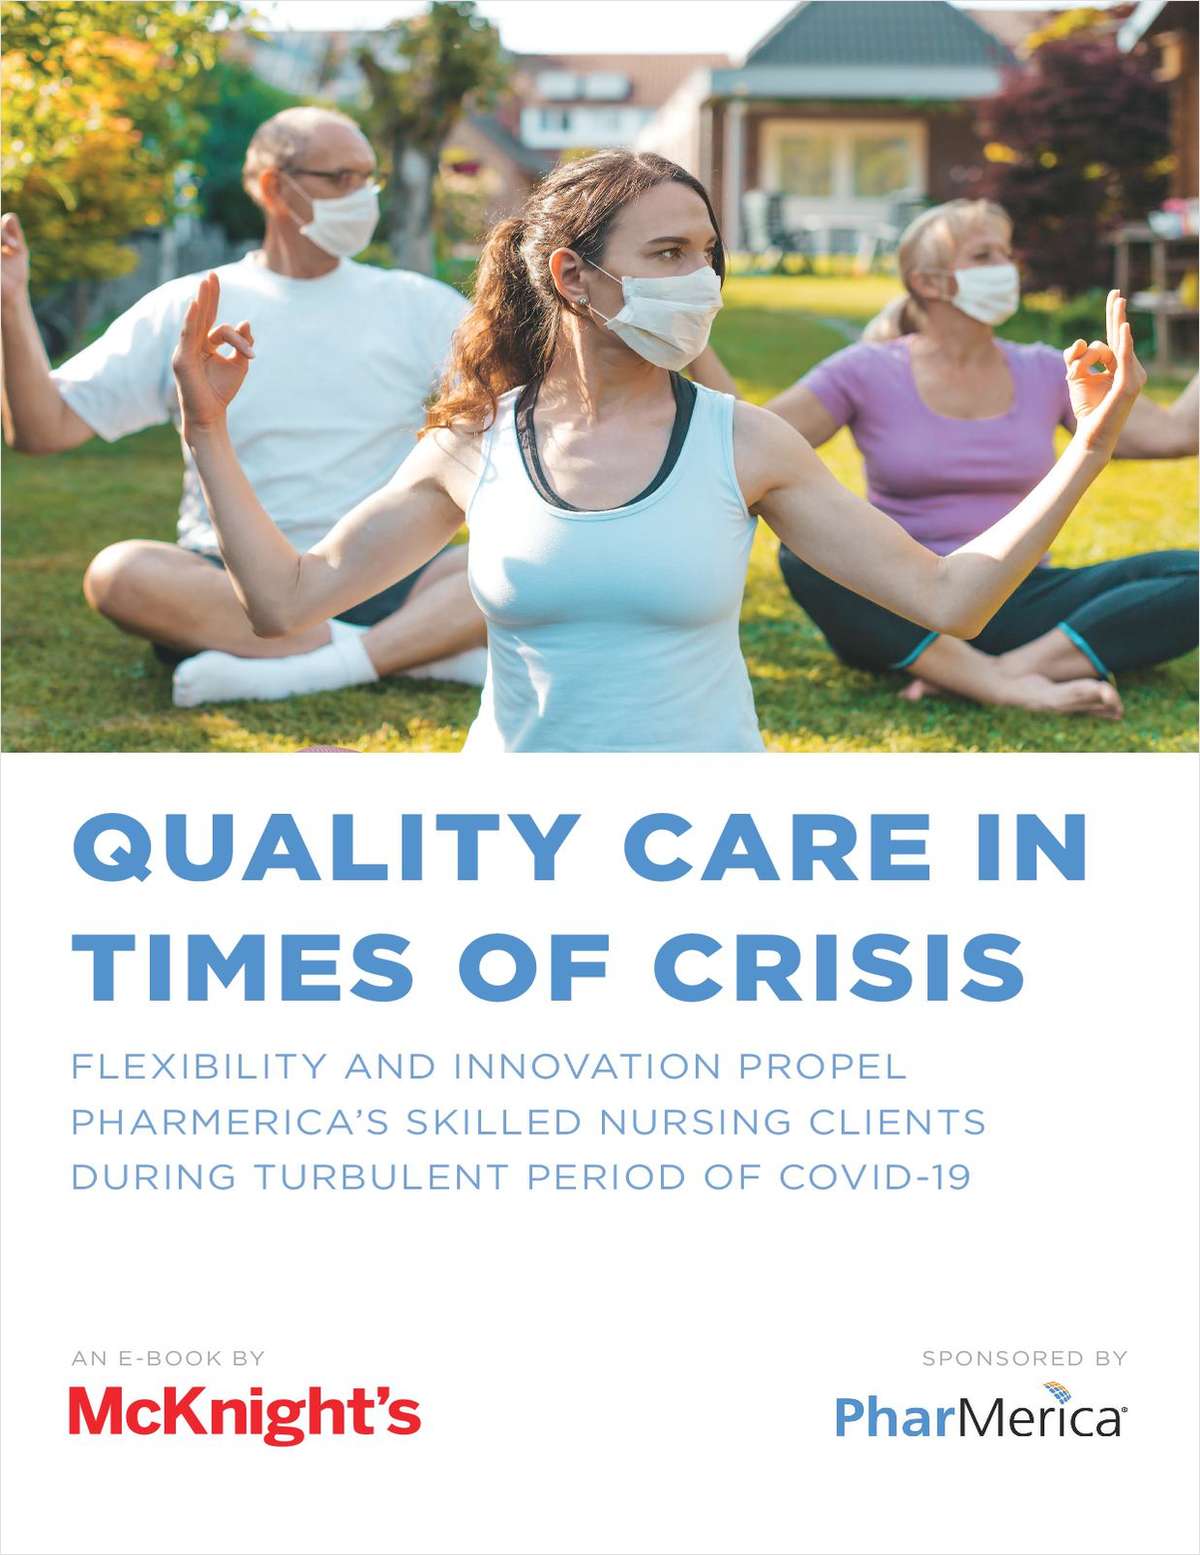 Quality Care in Times of Crisis